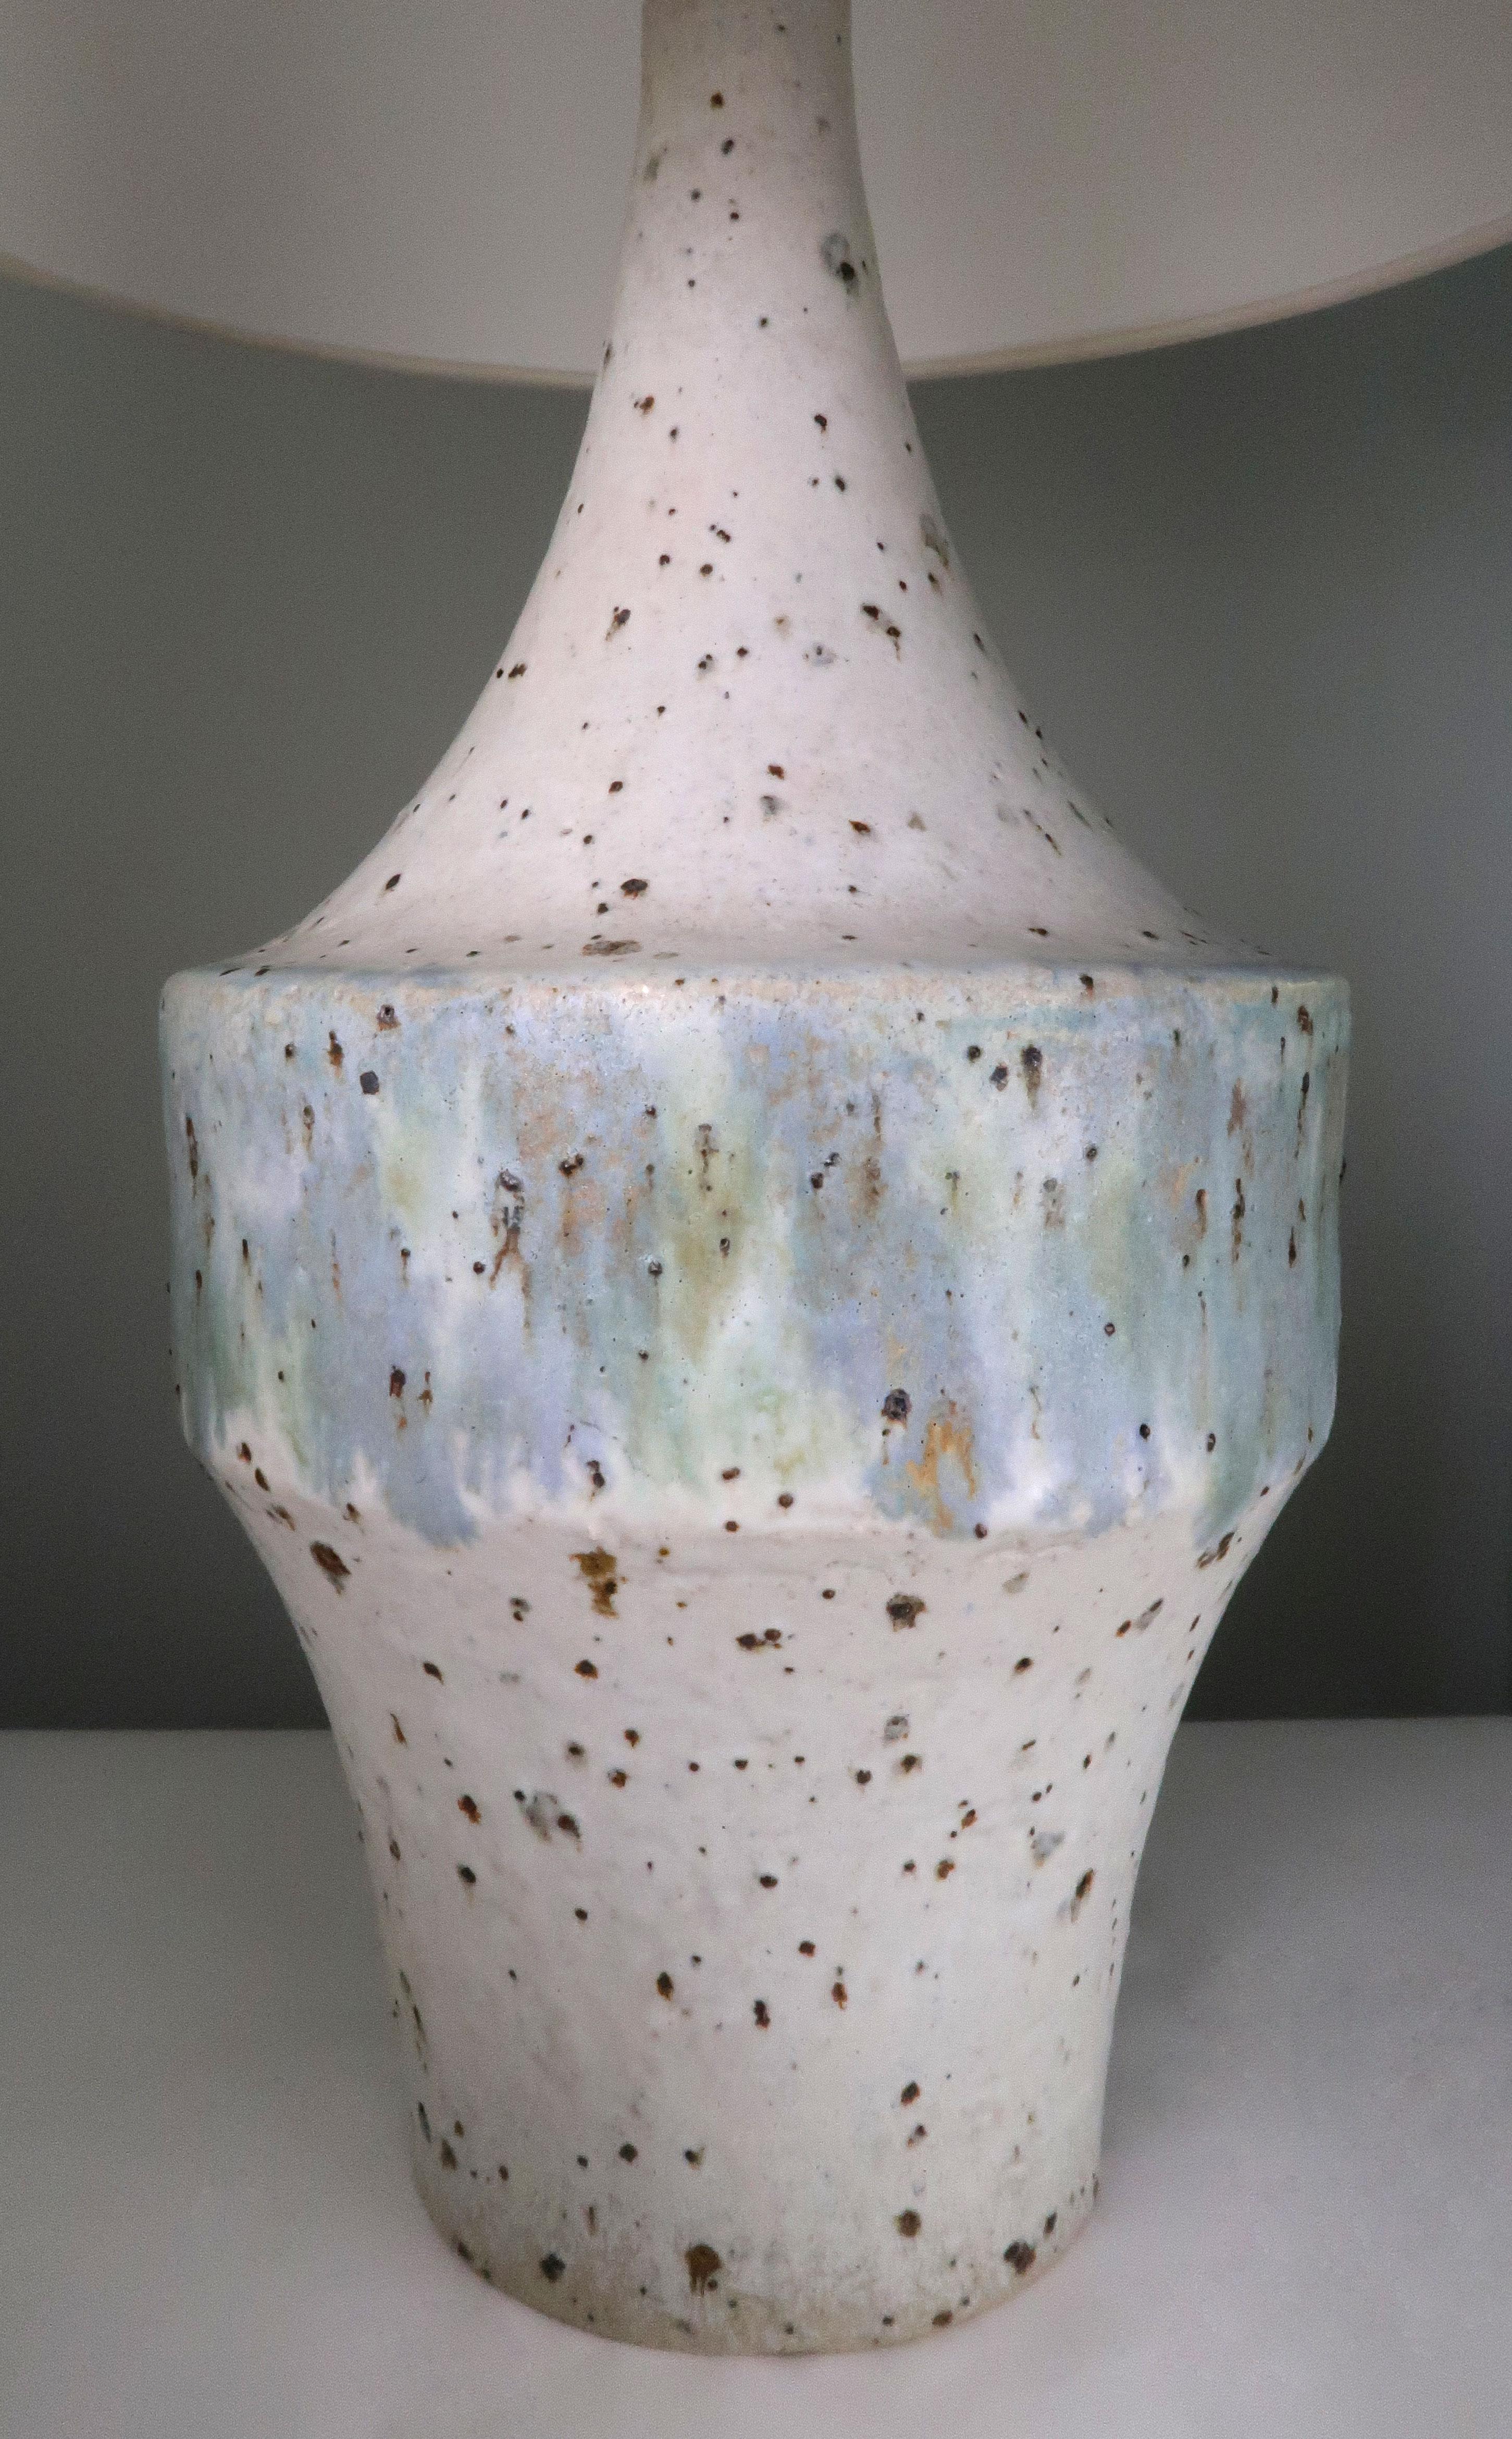 Large Danish Mid-Century Modern handmade and hand decorated ceramic lamp by Sejer Keramik. Manufactured on the Danish island of Funen in the late 1960s-early 1970s. Warm white, light grey spotted glaze with blue, green, golden, brown runny glaze